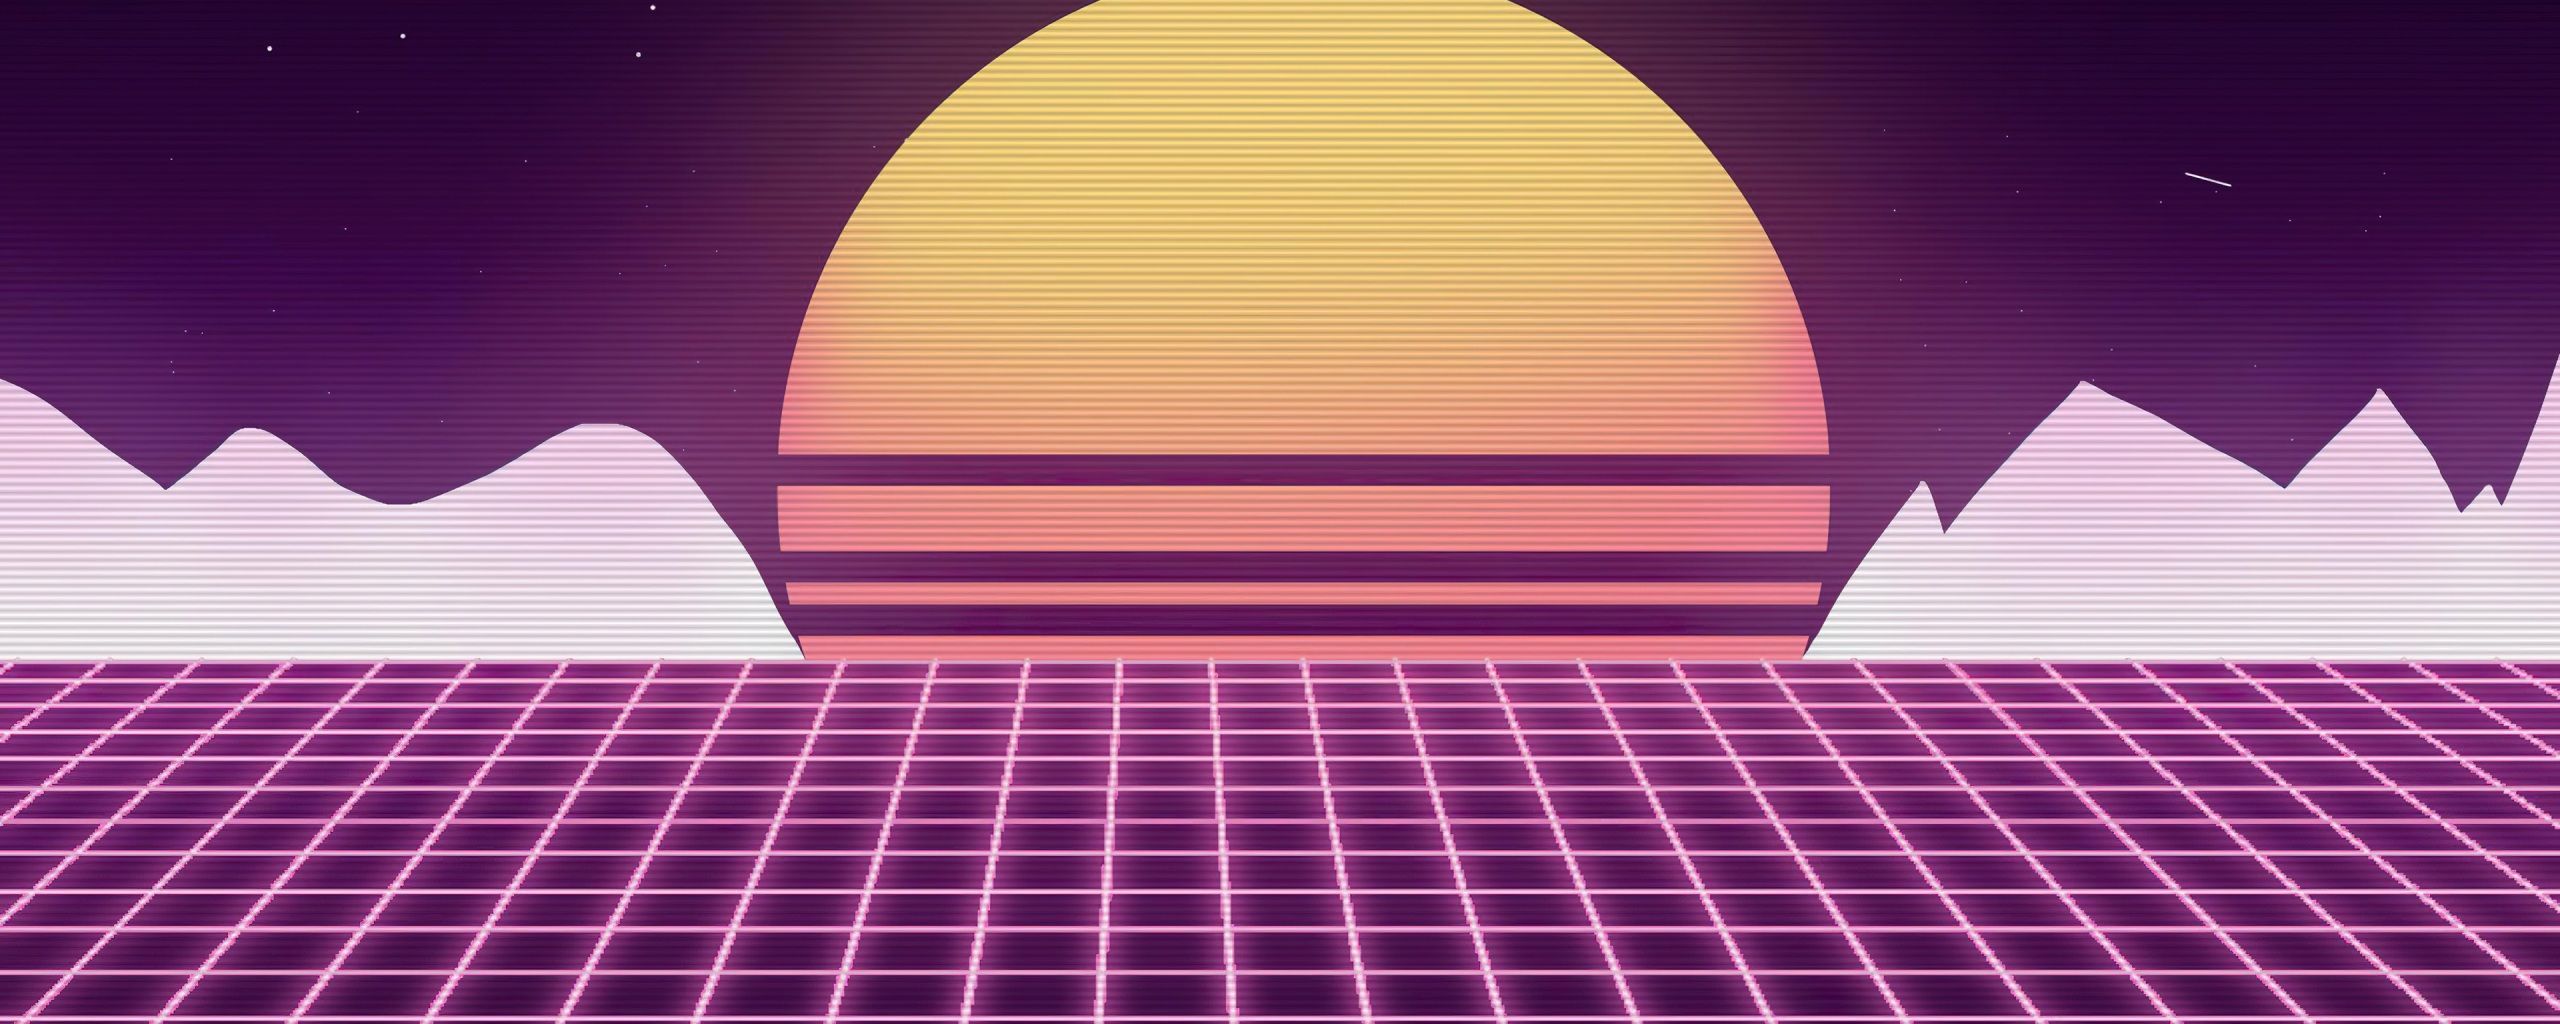 Synthwave sunset with mountains and a grid - Synthwave